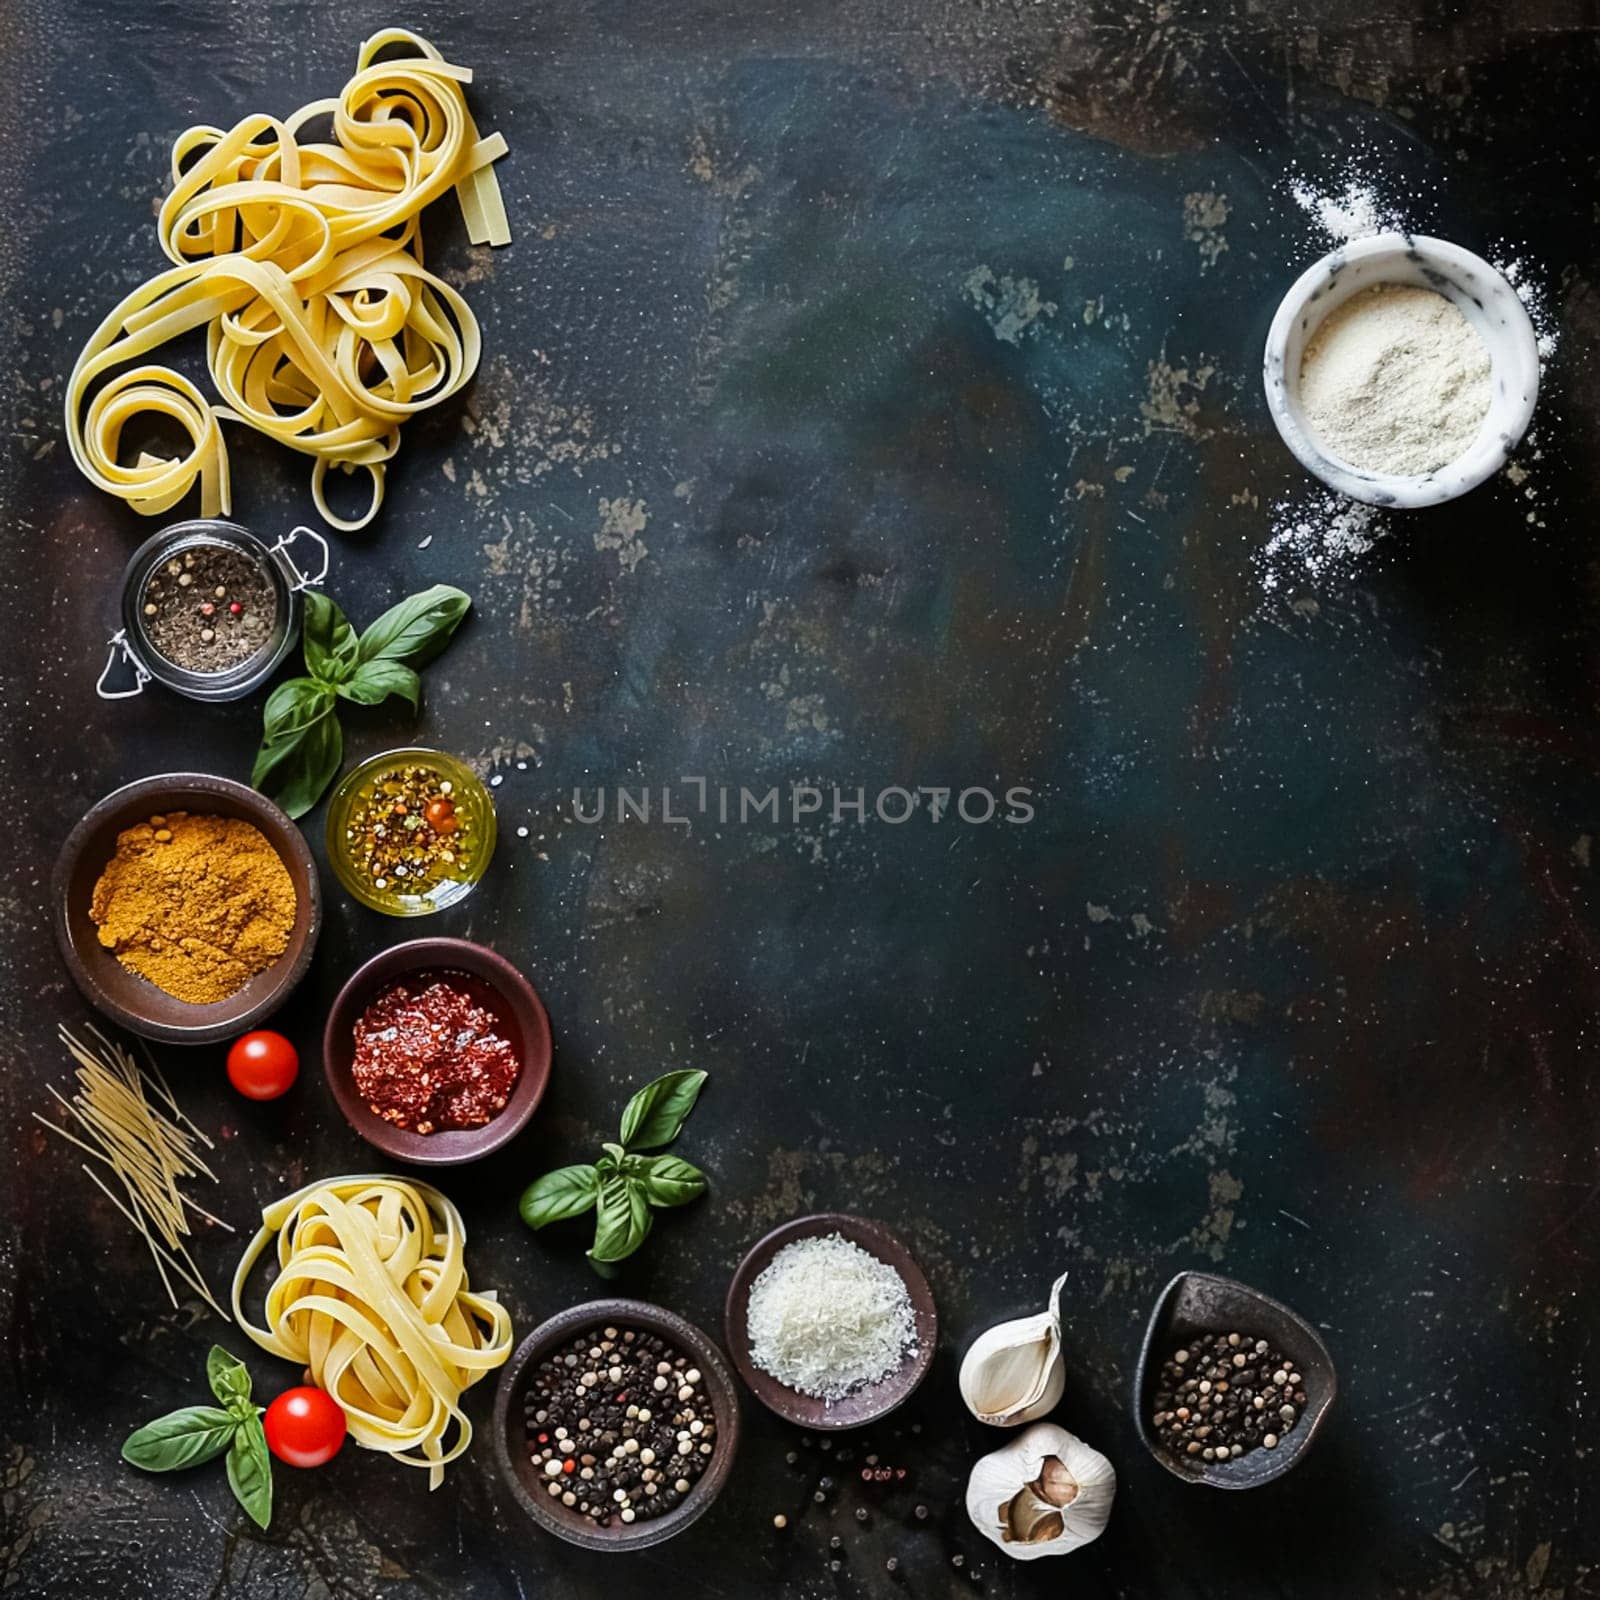 Pasta recipe preparation flatlay background with ingredients, spaghetti, olive oil, garlic, tomatoes and spices in the kitchen, homemade food recipe idea